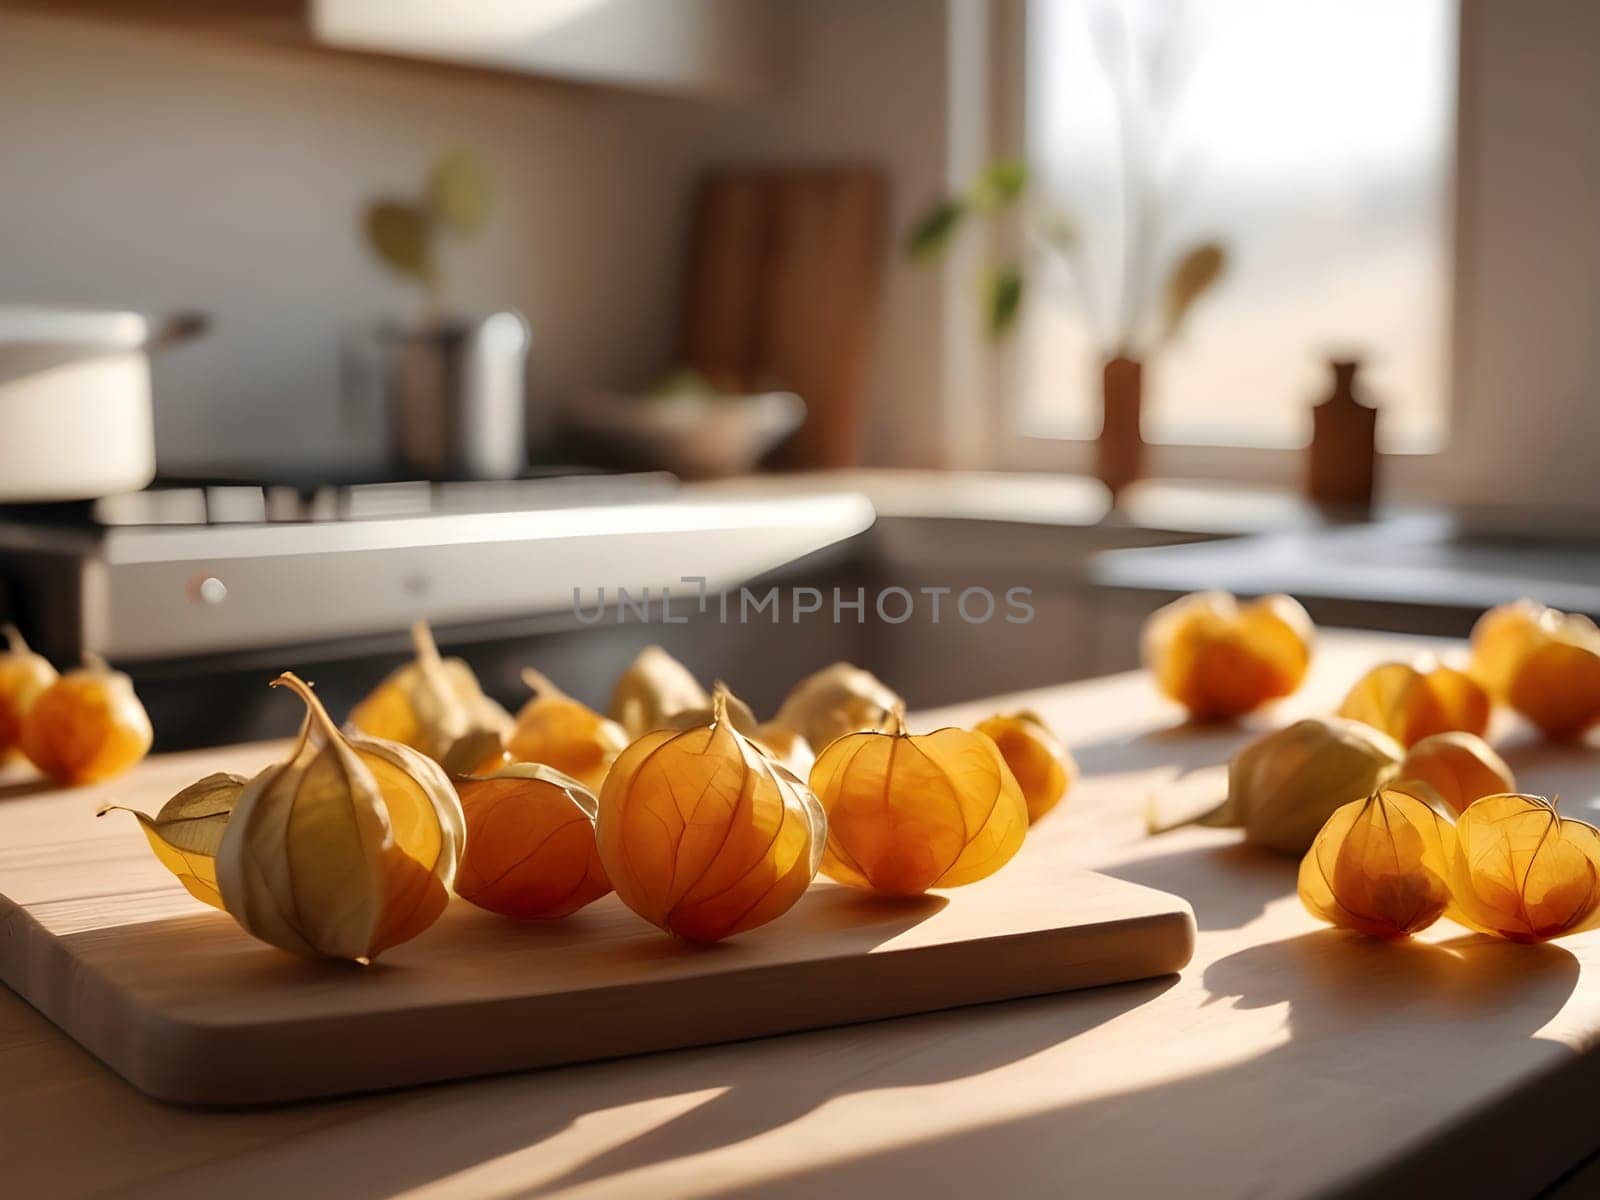 Golden Hour Culinary: Physalis on a Wooden Board in a Sunlit Kitchen.